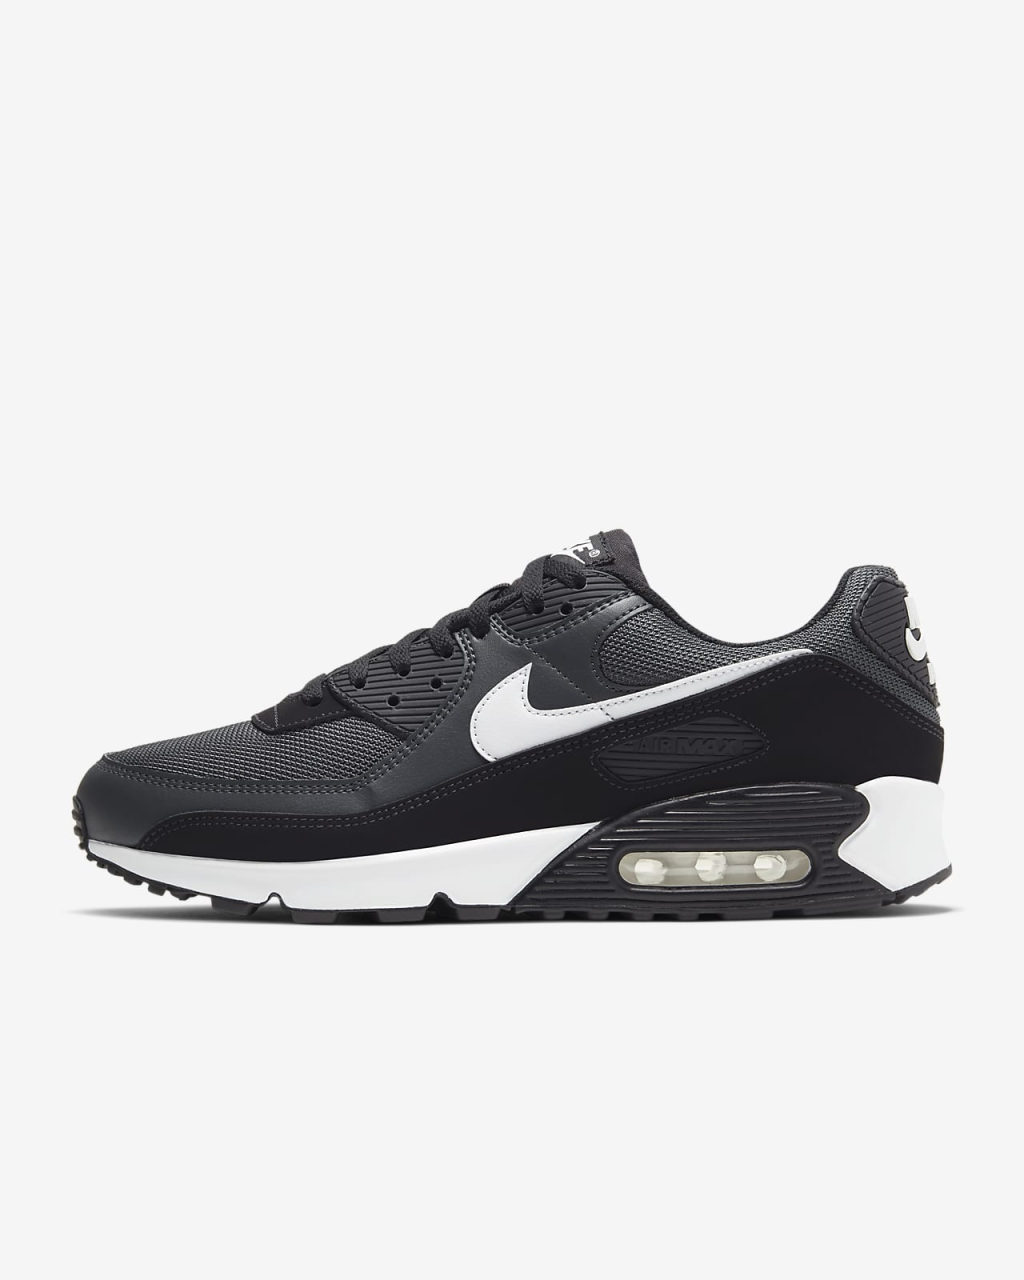 Picture of: Nike Air Max  Herrenschuh